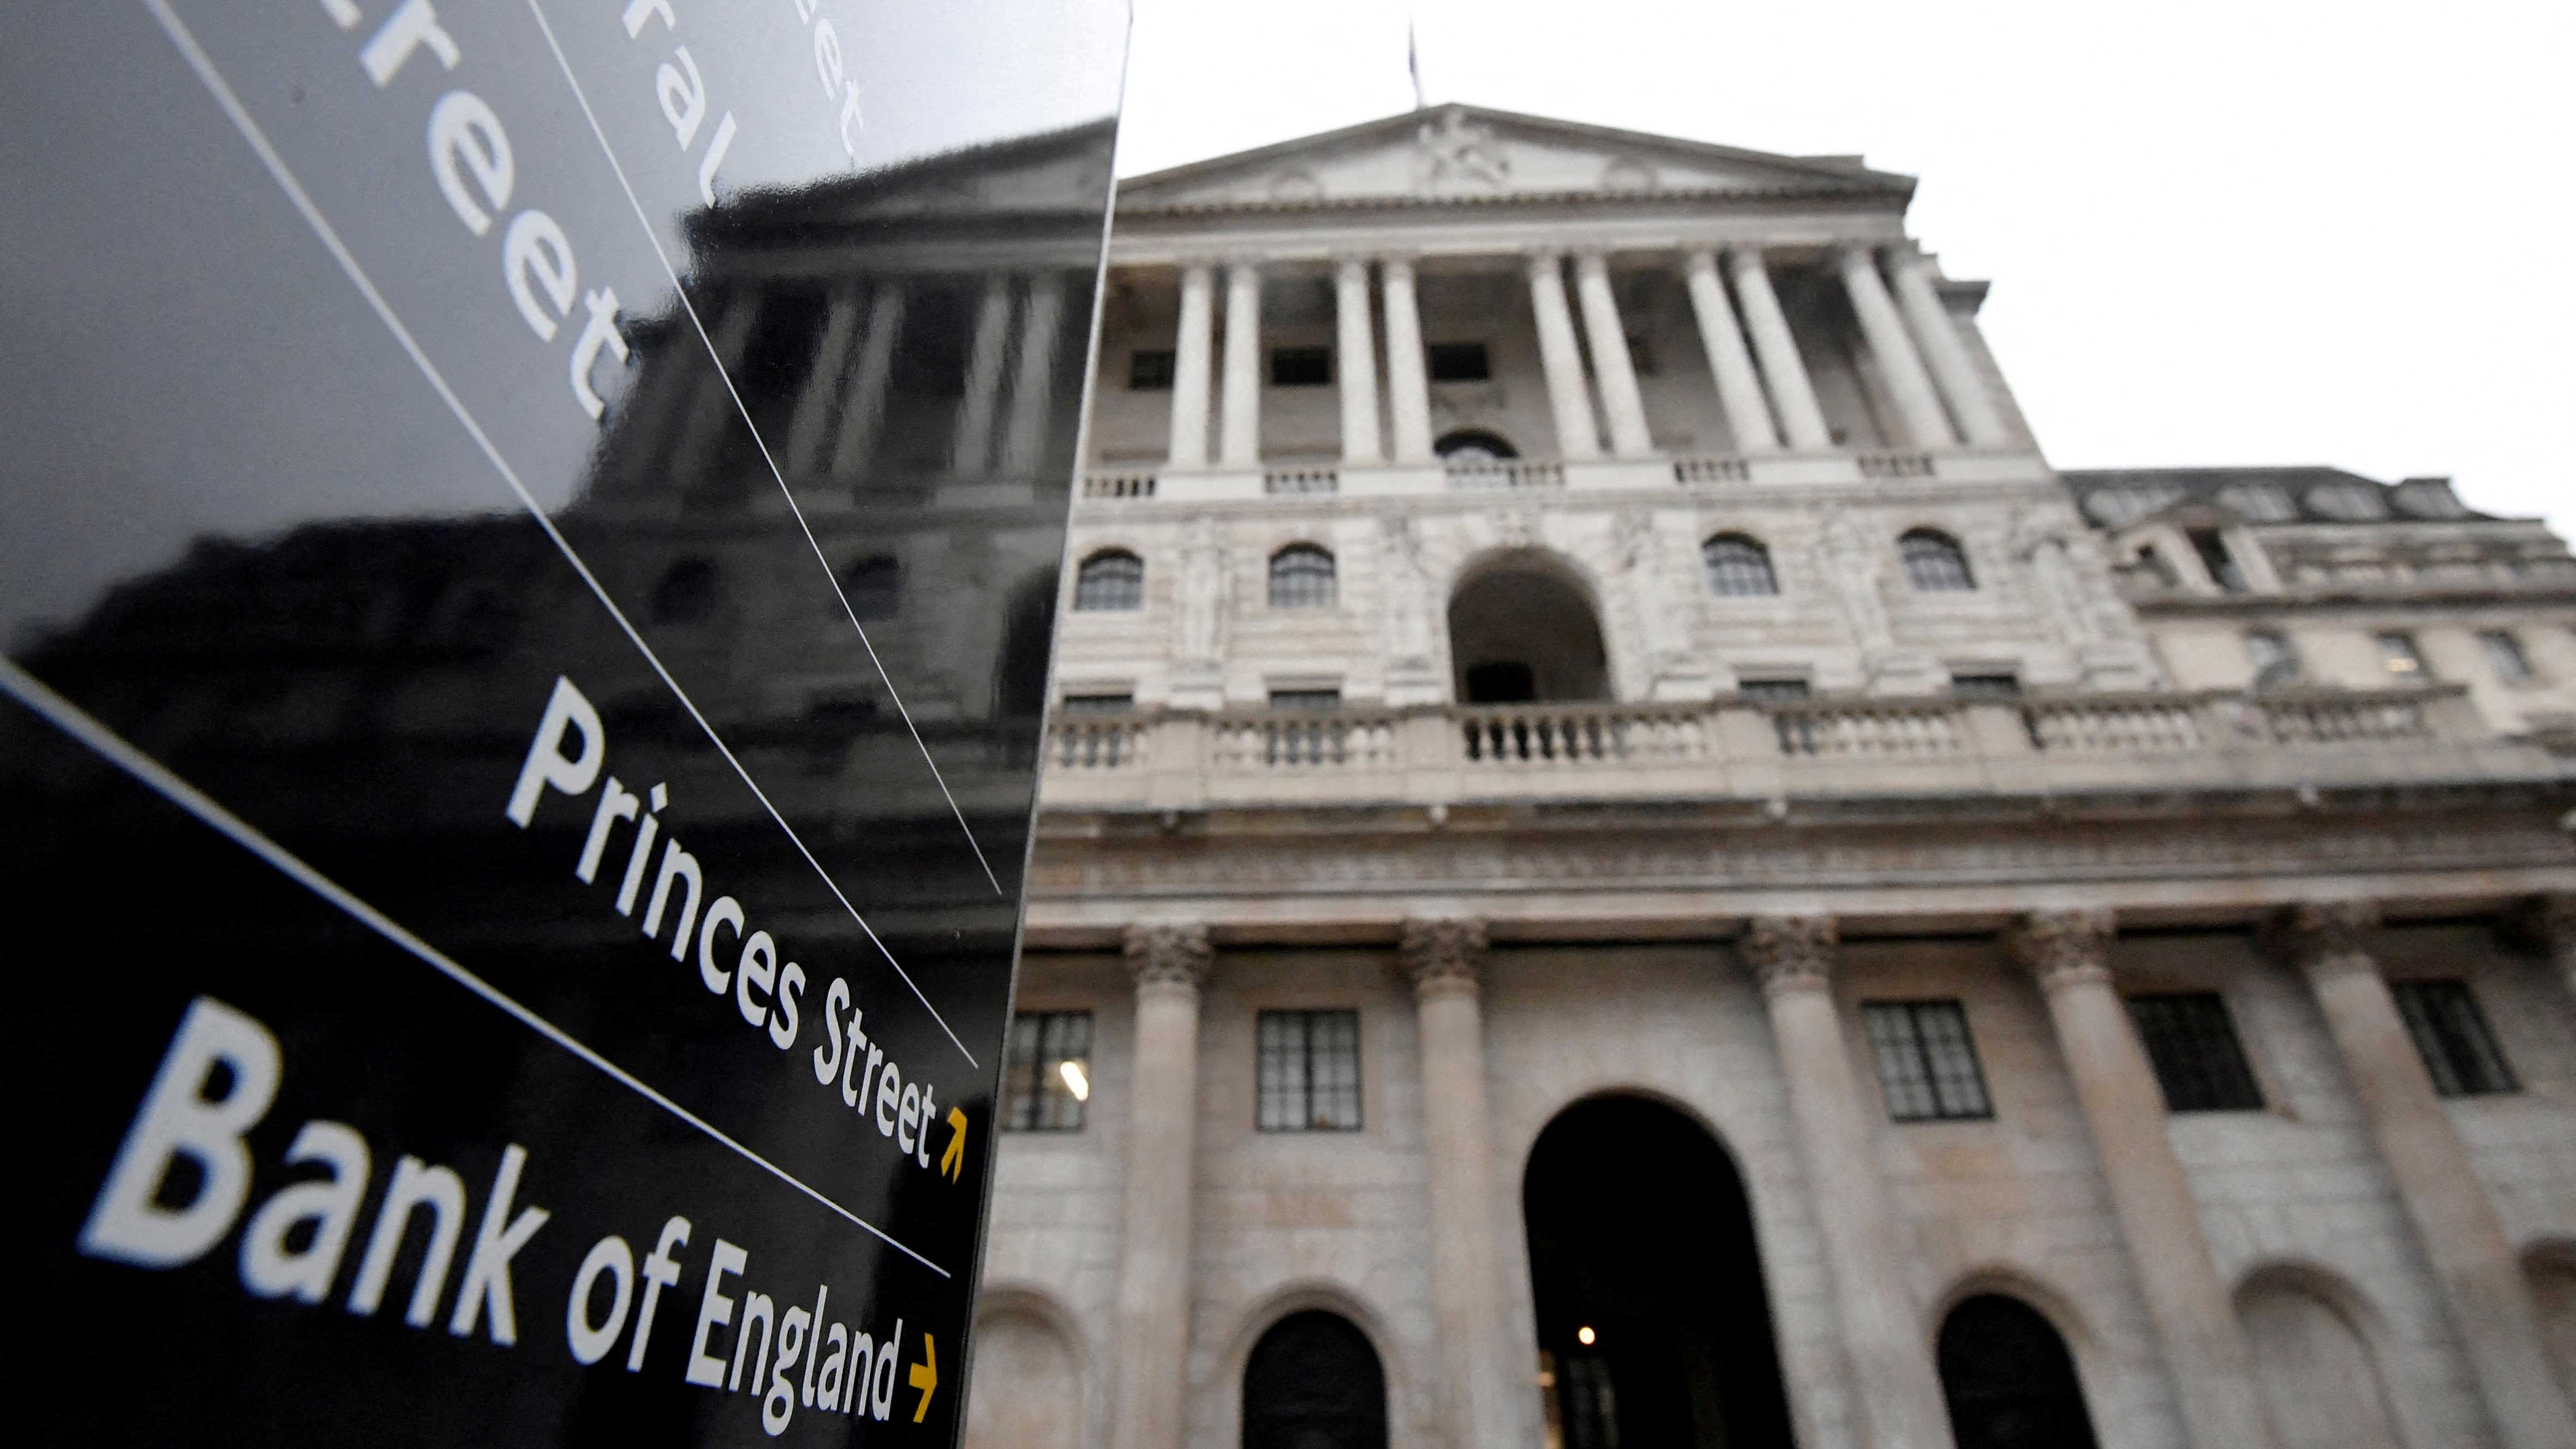 Bank of England tells lenders to brace for economic storm